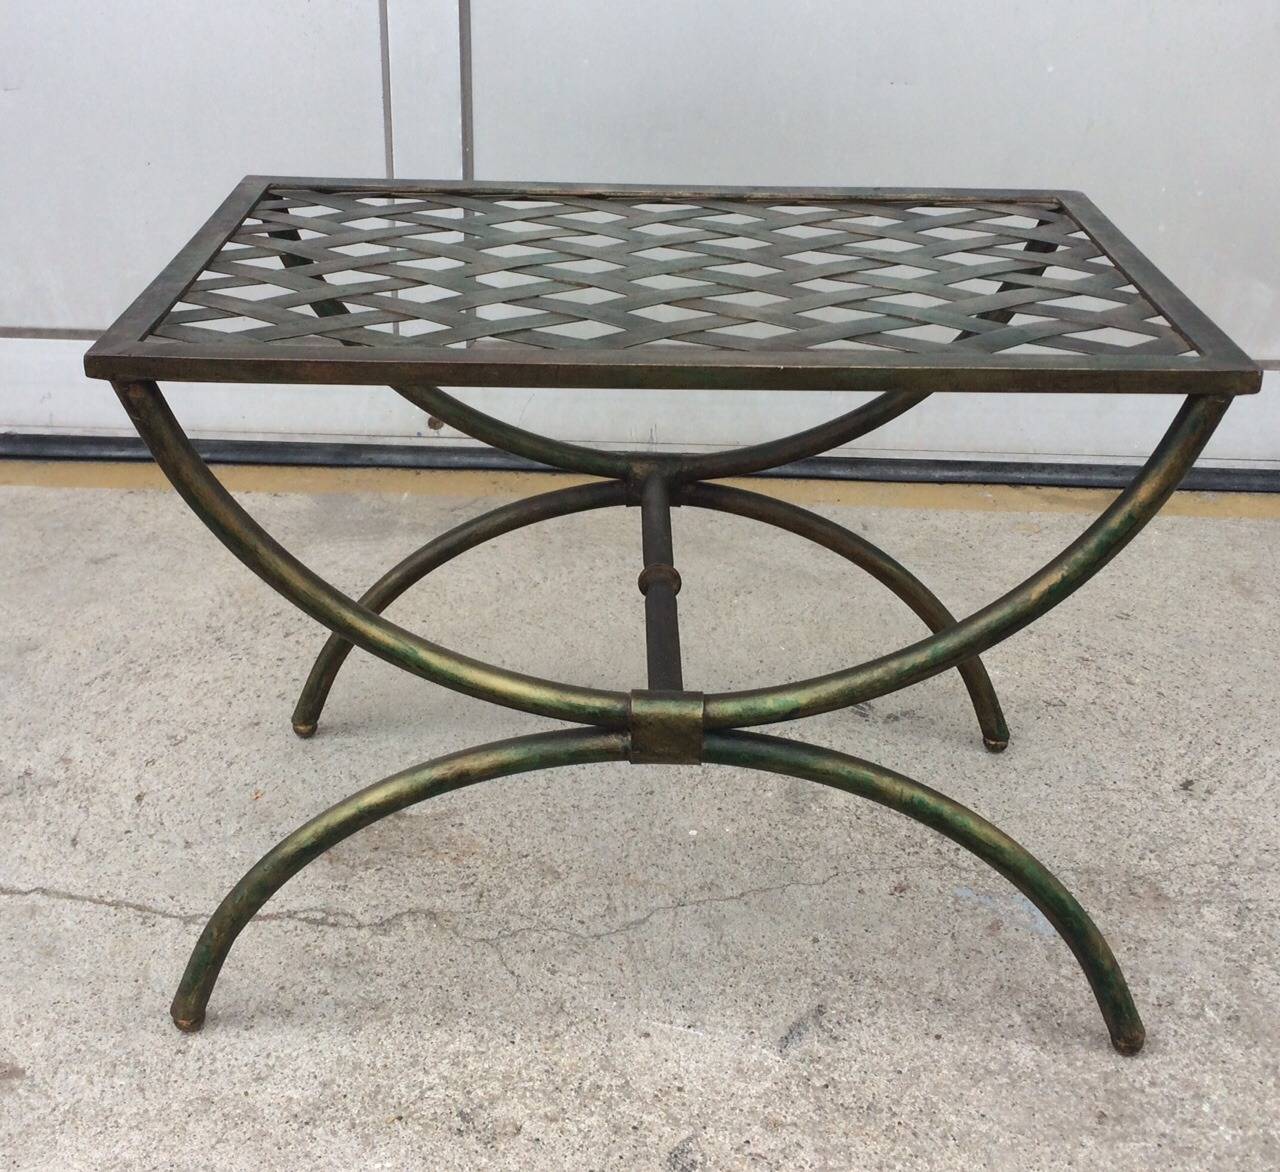 Hollywood Regency Bench
Circa 1960
Brass, gilded, dyed surface
approx 14 x 21 x 12 inches
Stamped made in italy underneath
excellent original condition